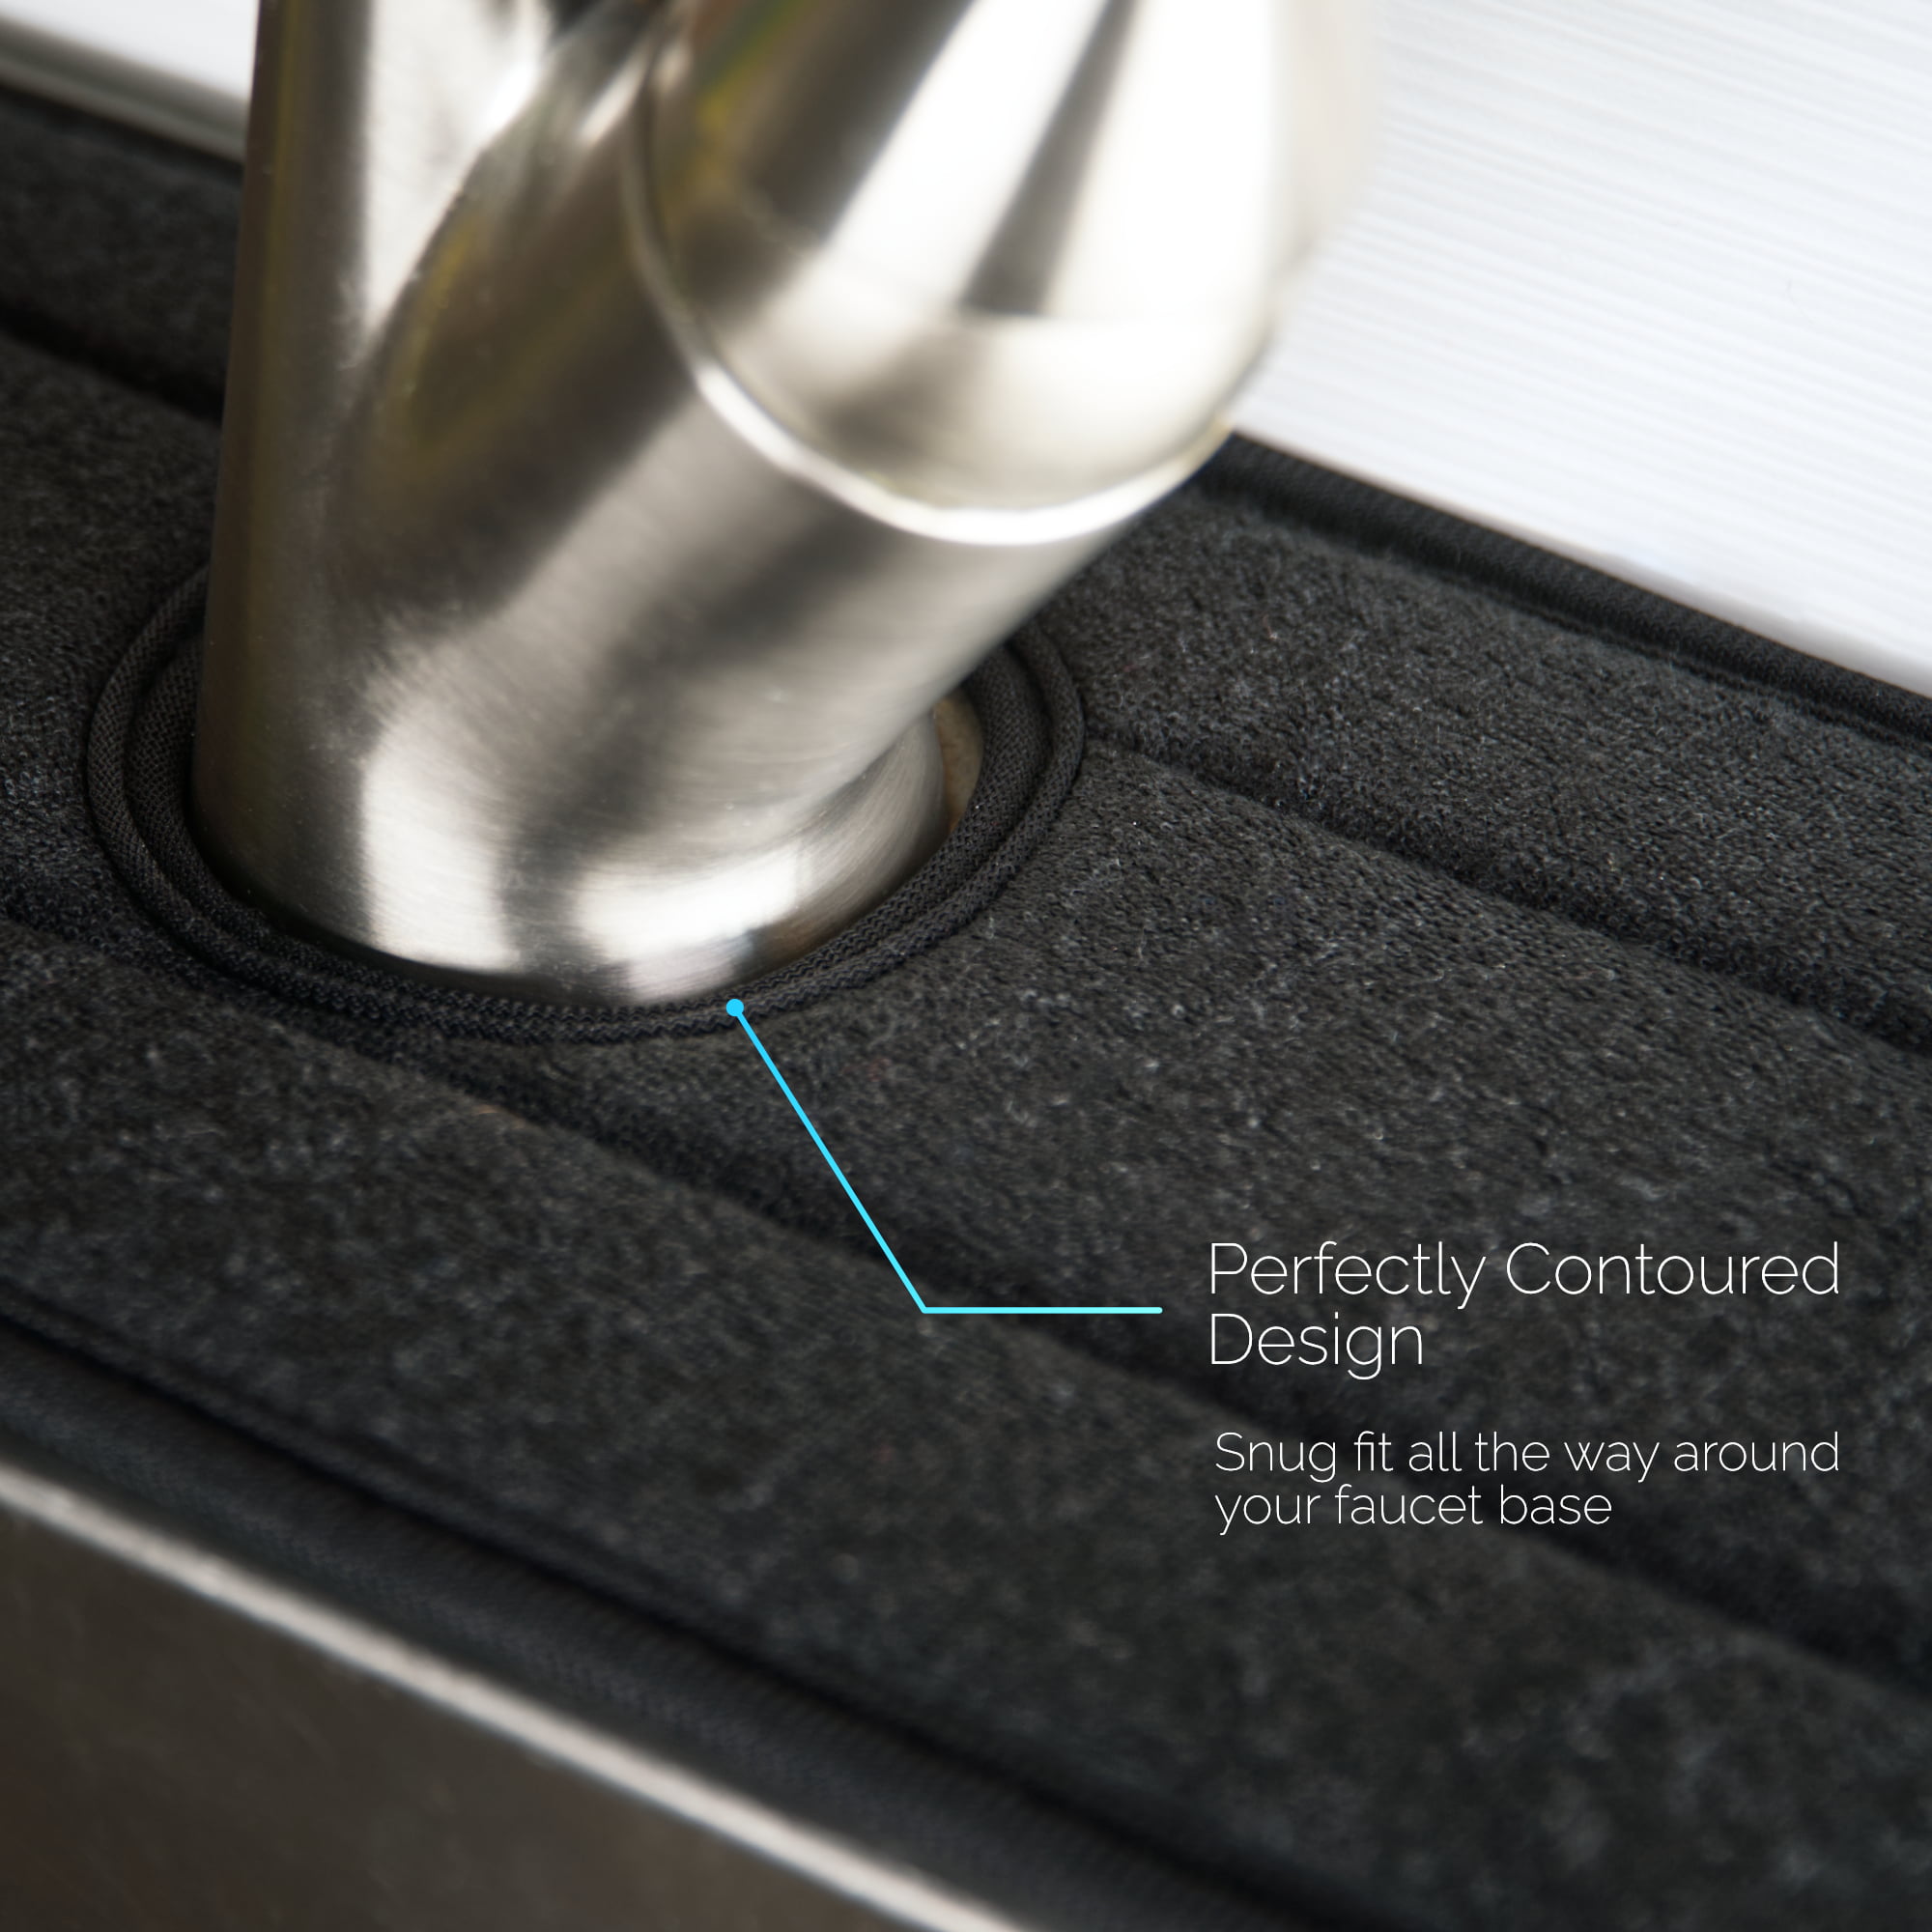 NEW Ternal Sinkmat for Kitchen Faucet - household items - by owner